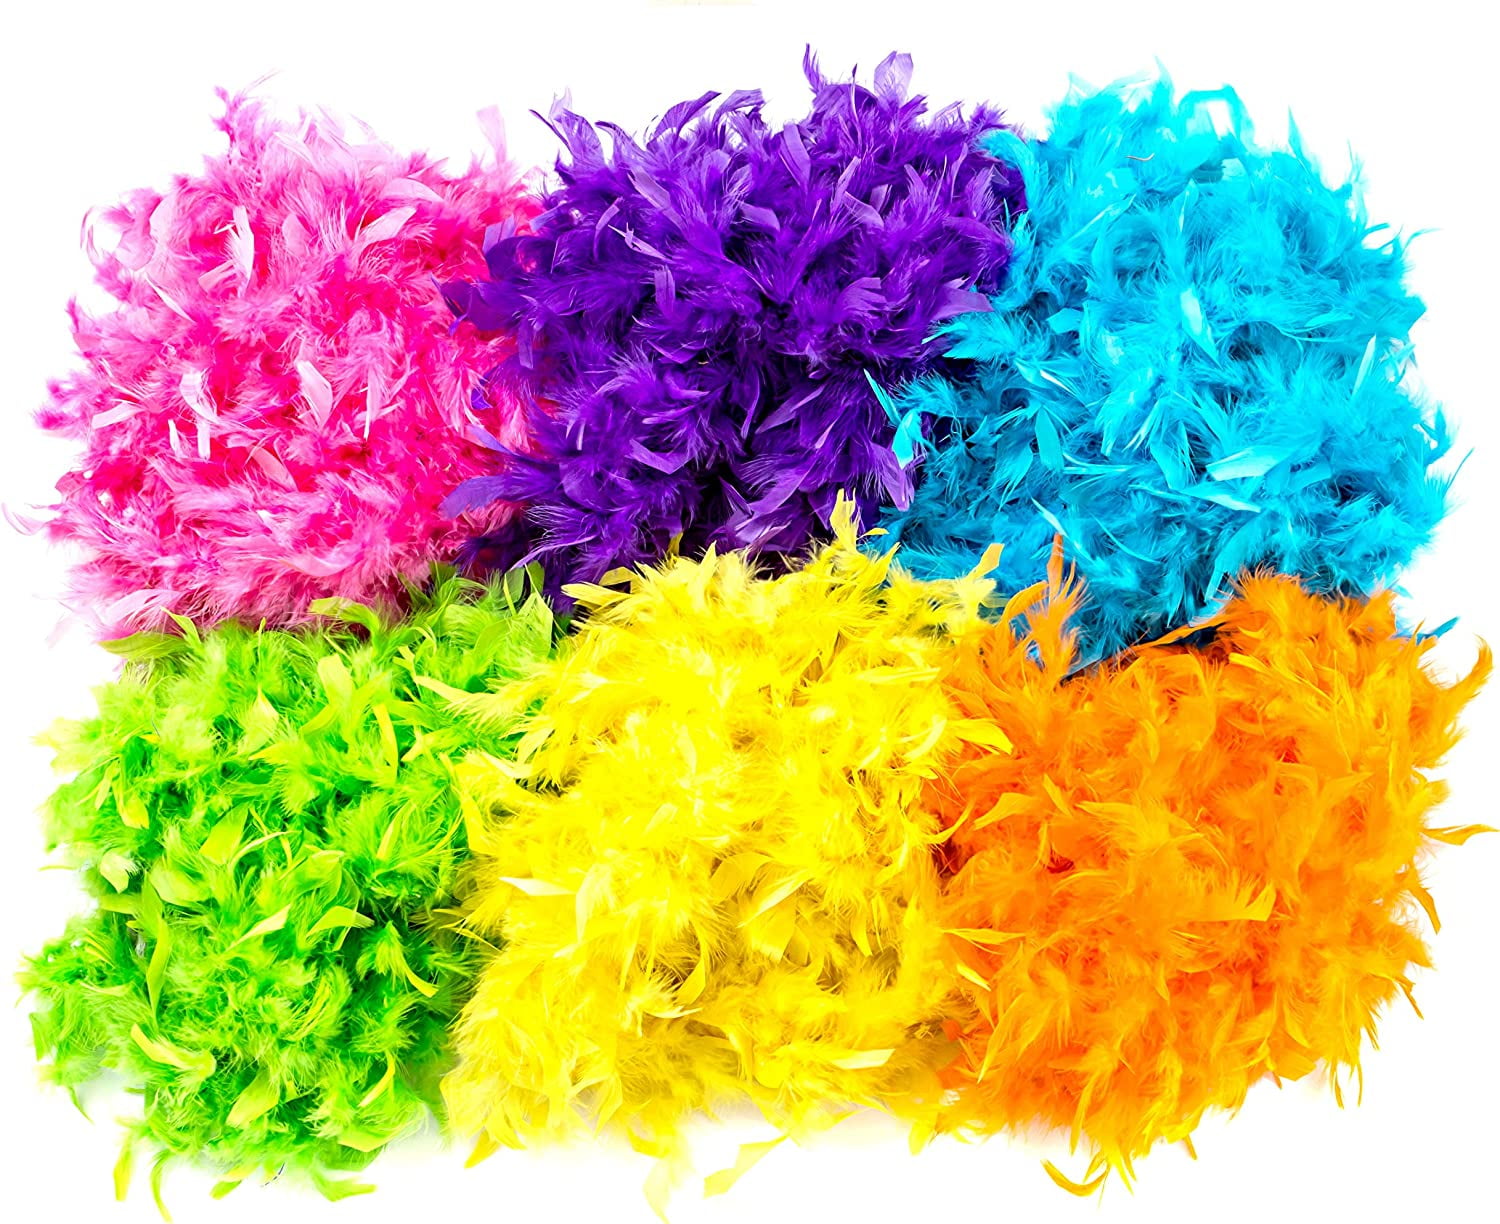 Ultimate Party Halloween Feather Boas - 6 Pack of 6 Feet Long Boas with Feathers - Perfect for Halloween Costumes, Party Outfits, and Party Favors